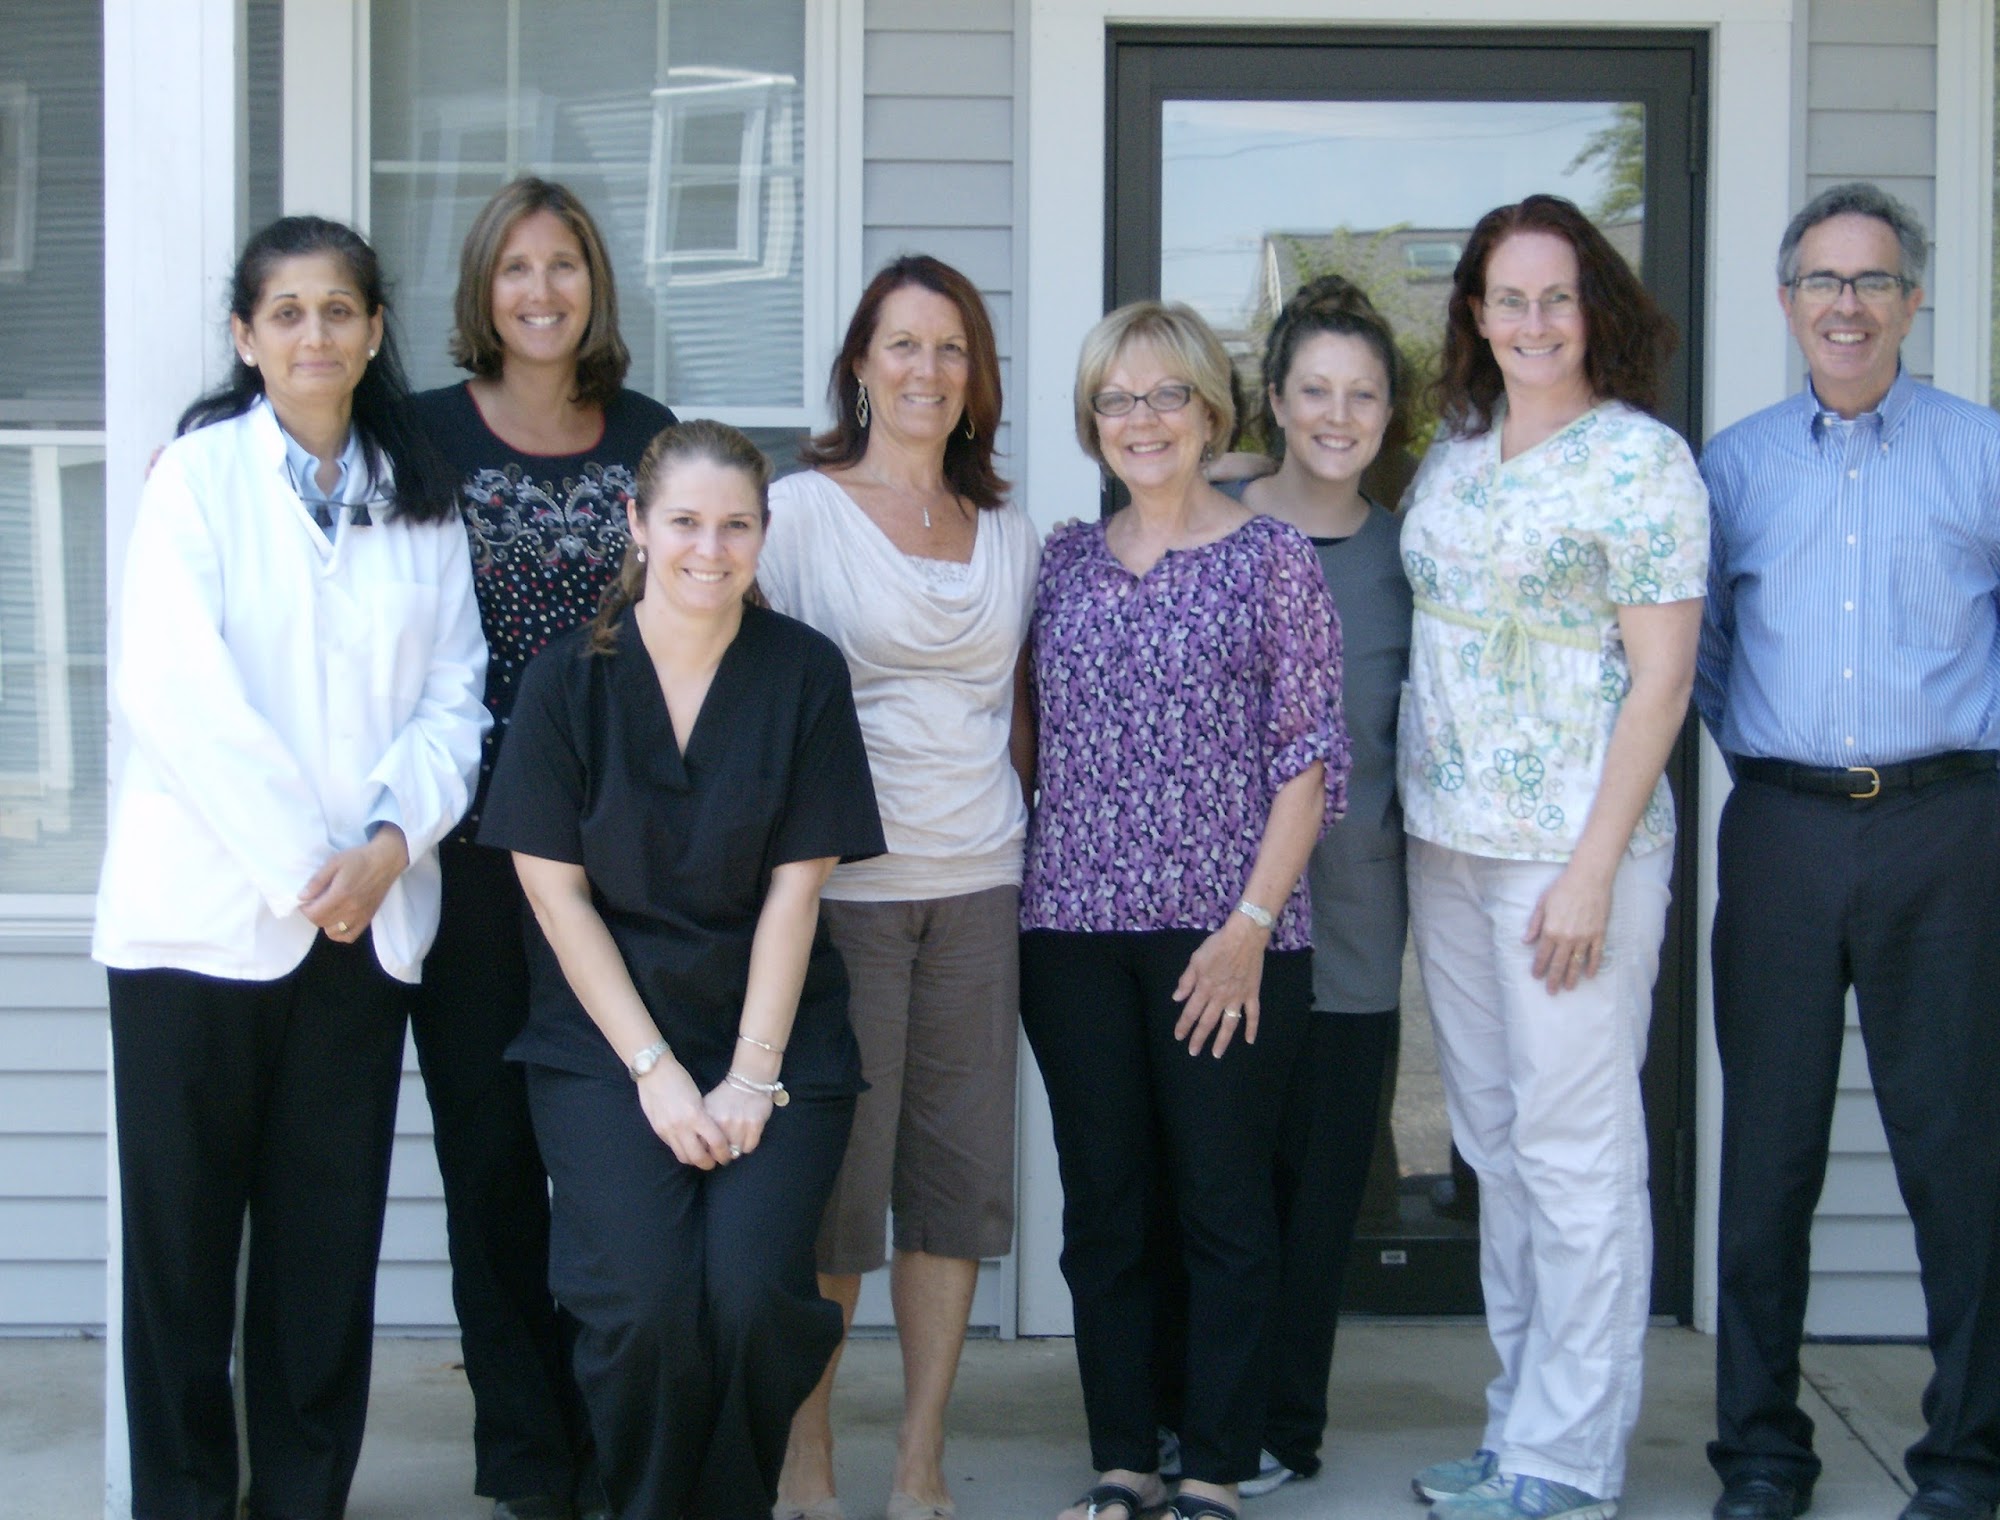 Dr. Mark Polasky Family and Cosmetic Dentistry 212 Worcester St, North Grafton Massachusetts 01536